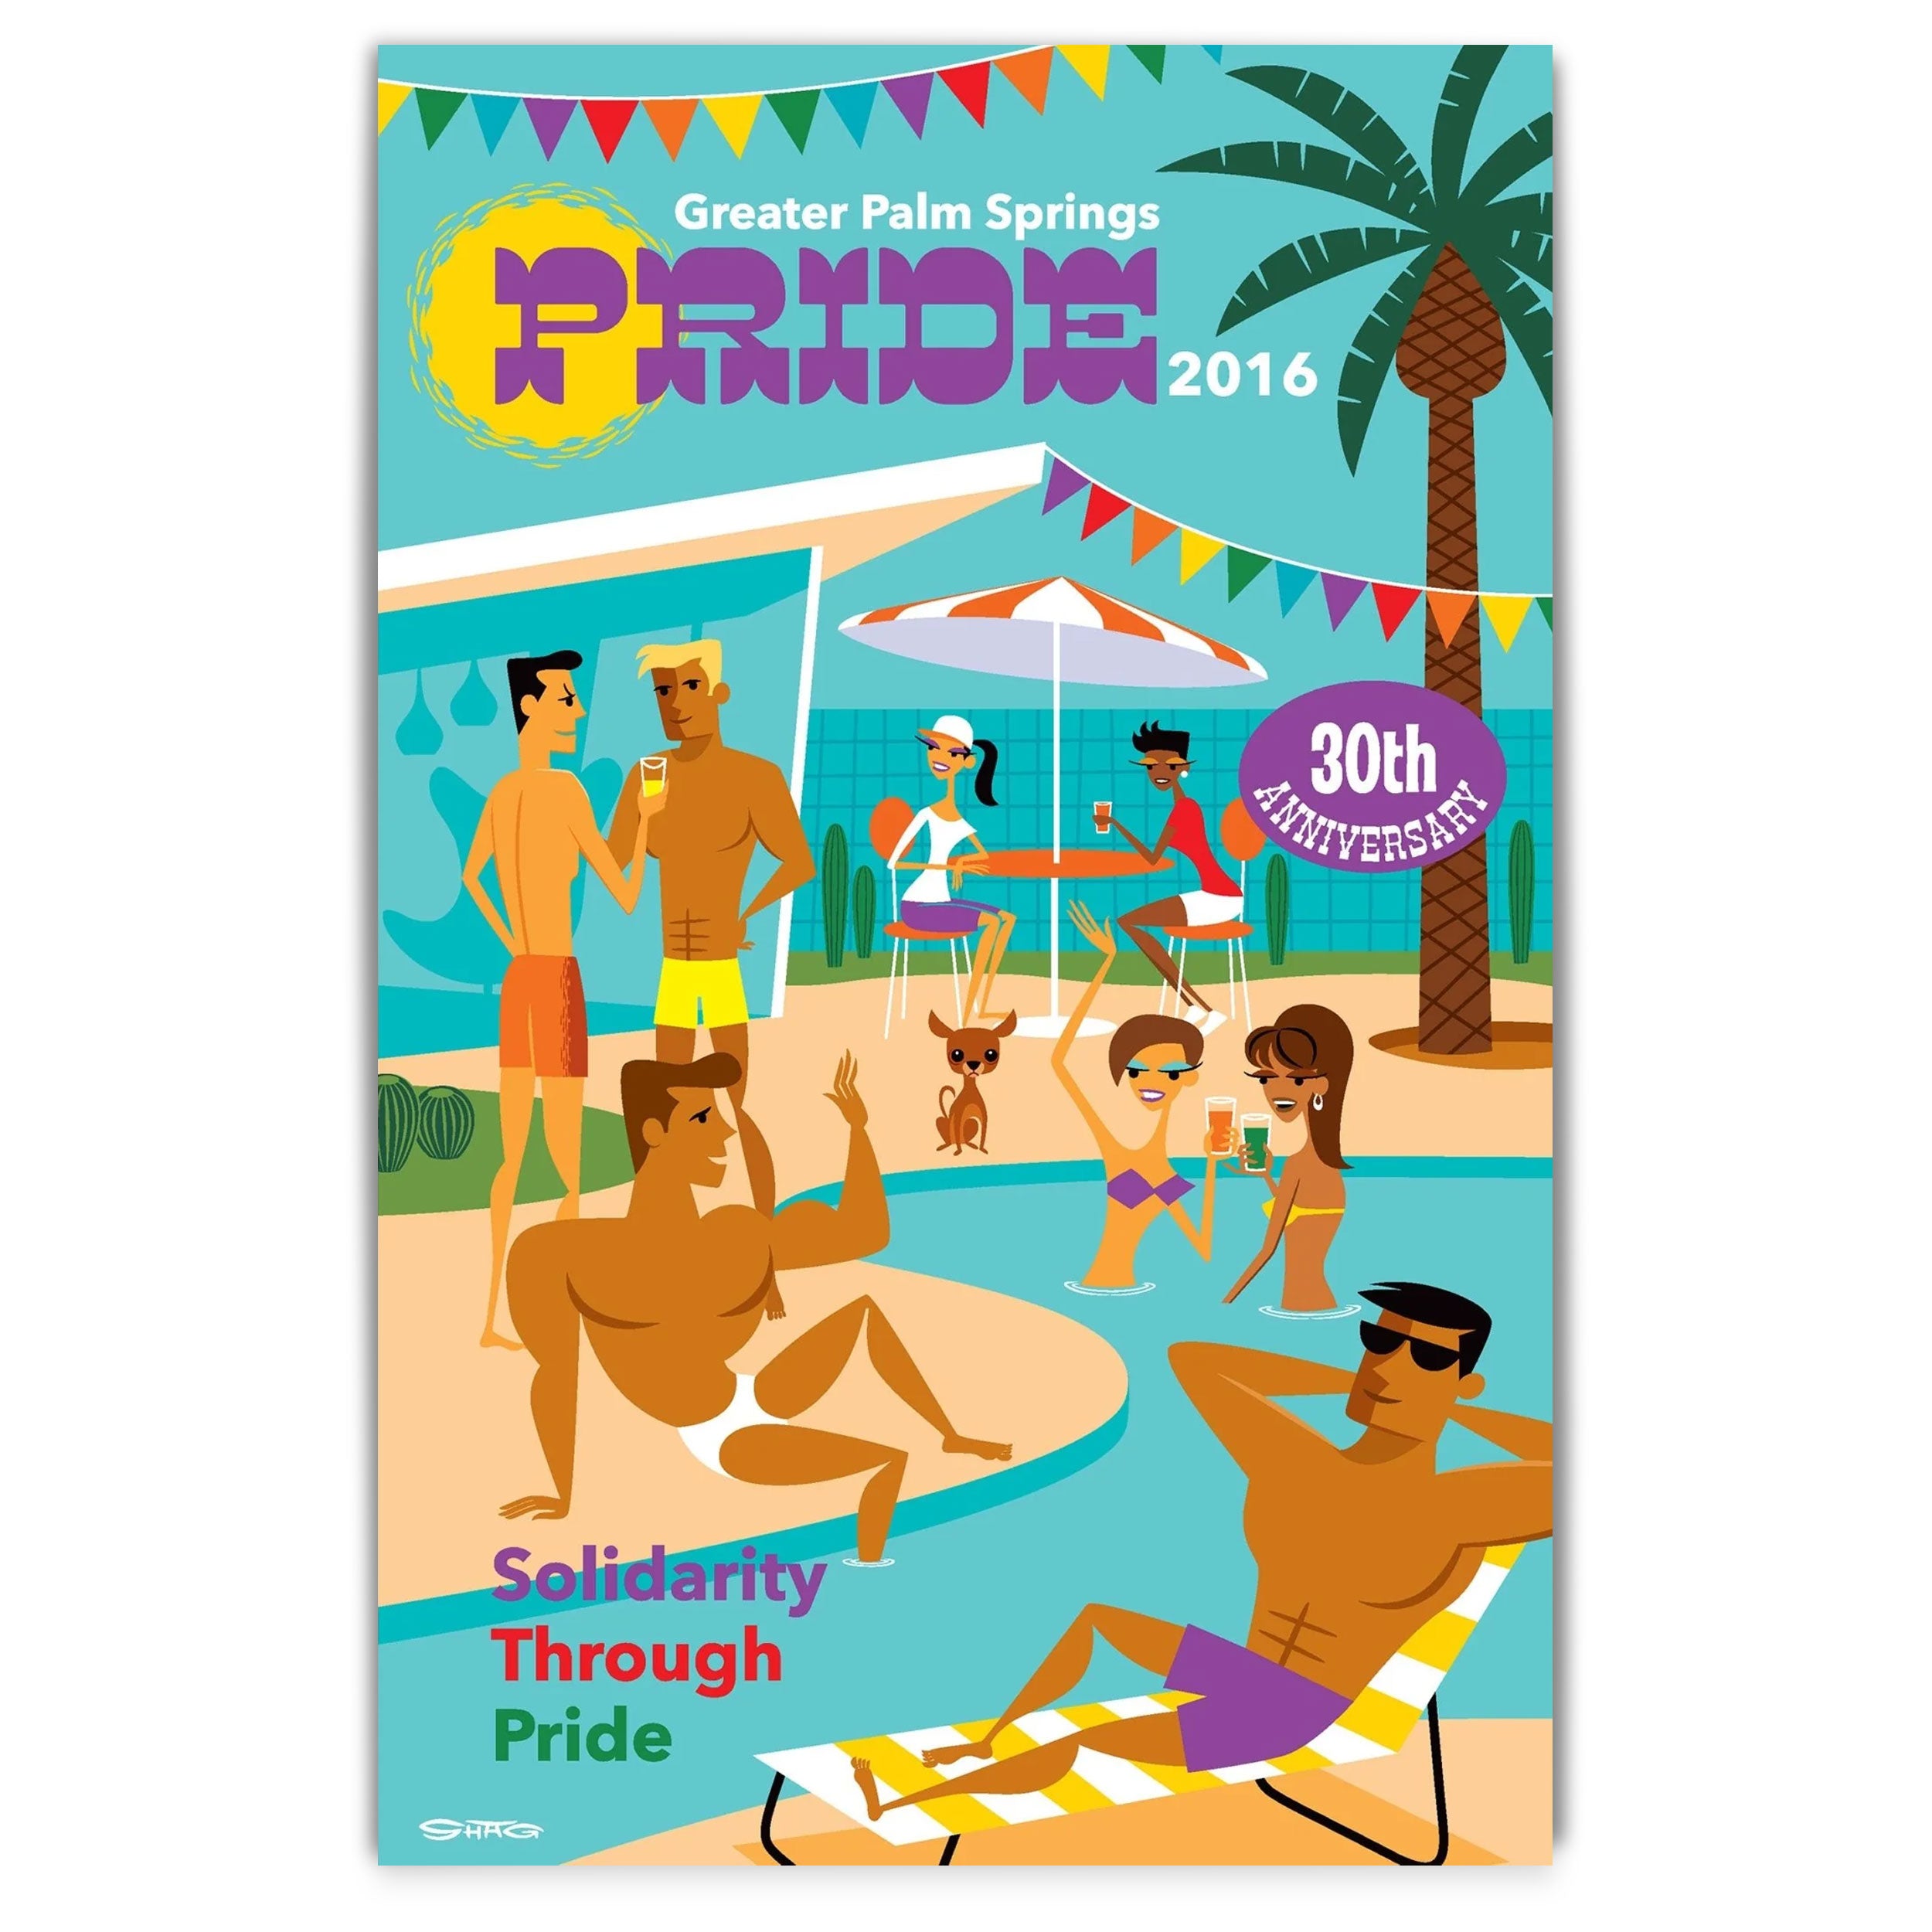 2016-greater-palm-springs-pride-official-poster-by-shagpalm-springs-pride.jpg